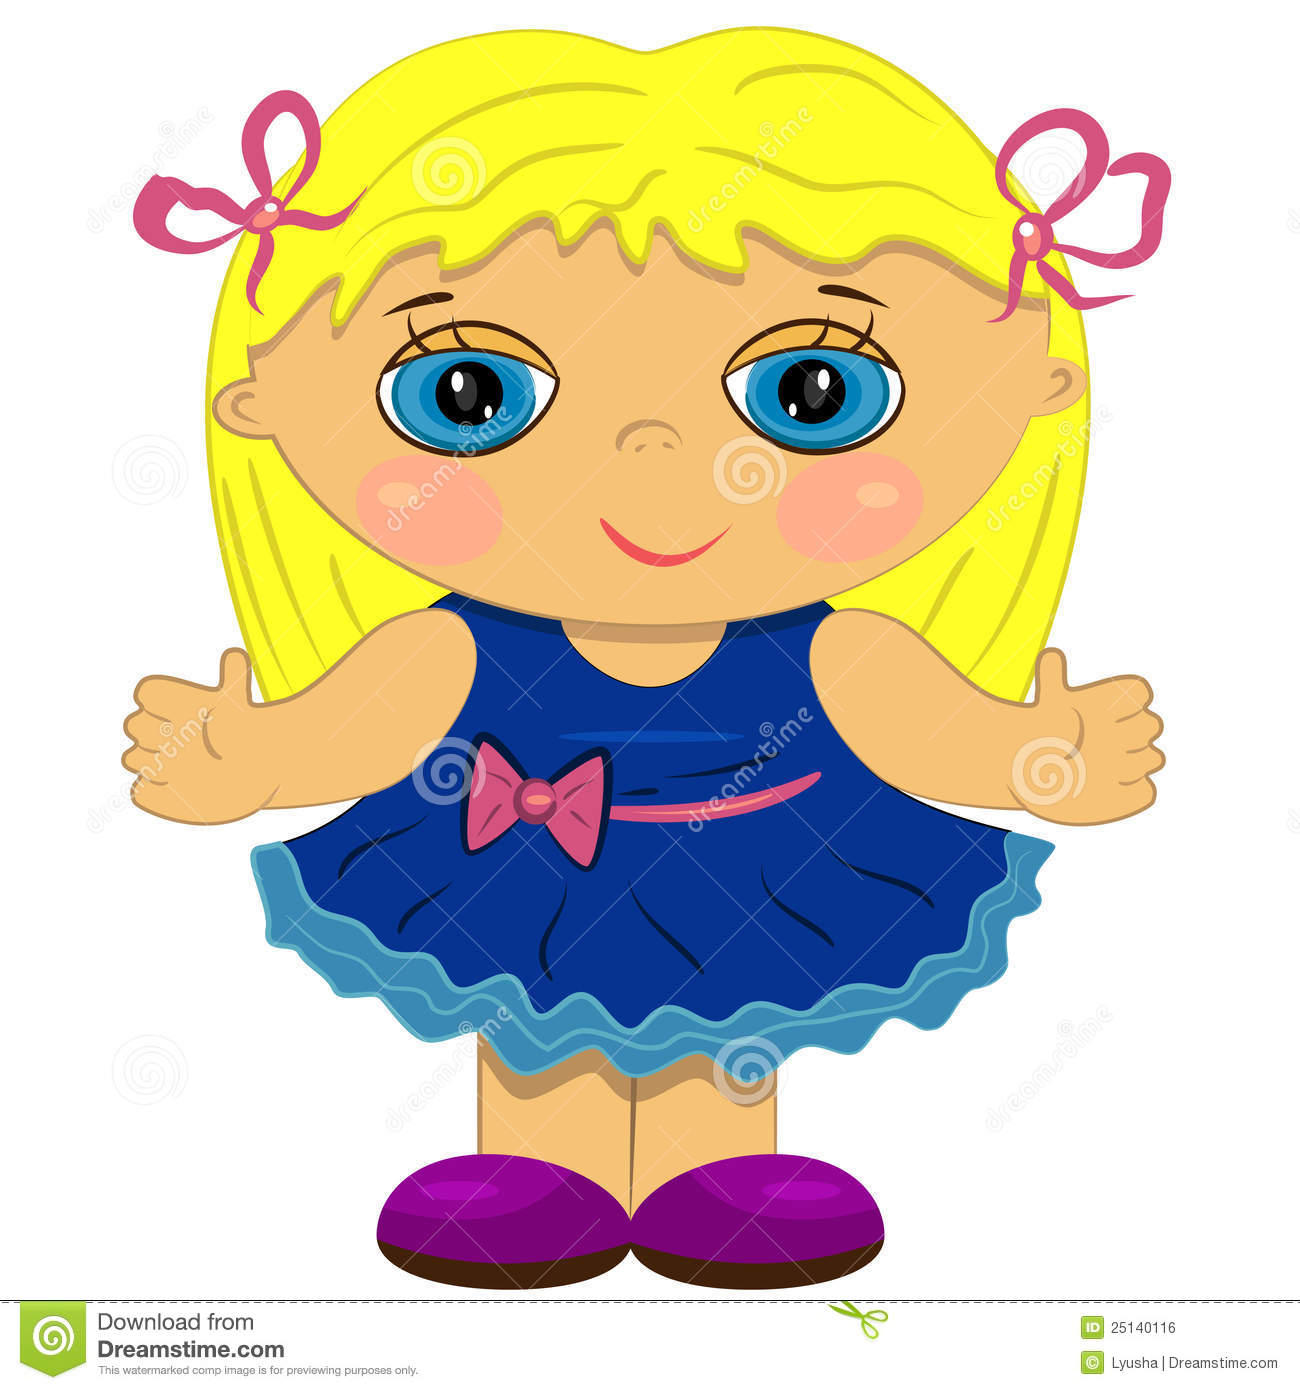 clipart picture of a doll - photo #48